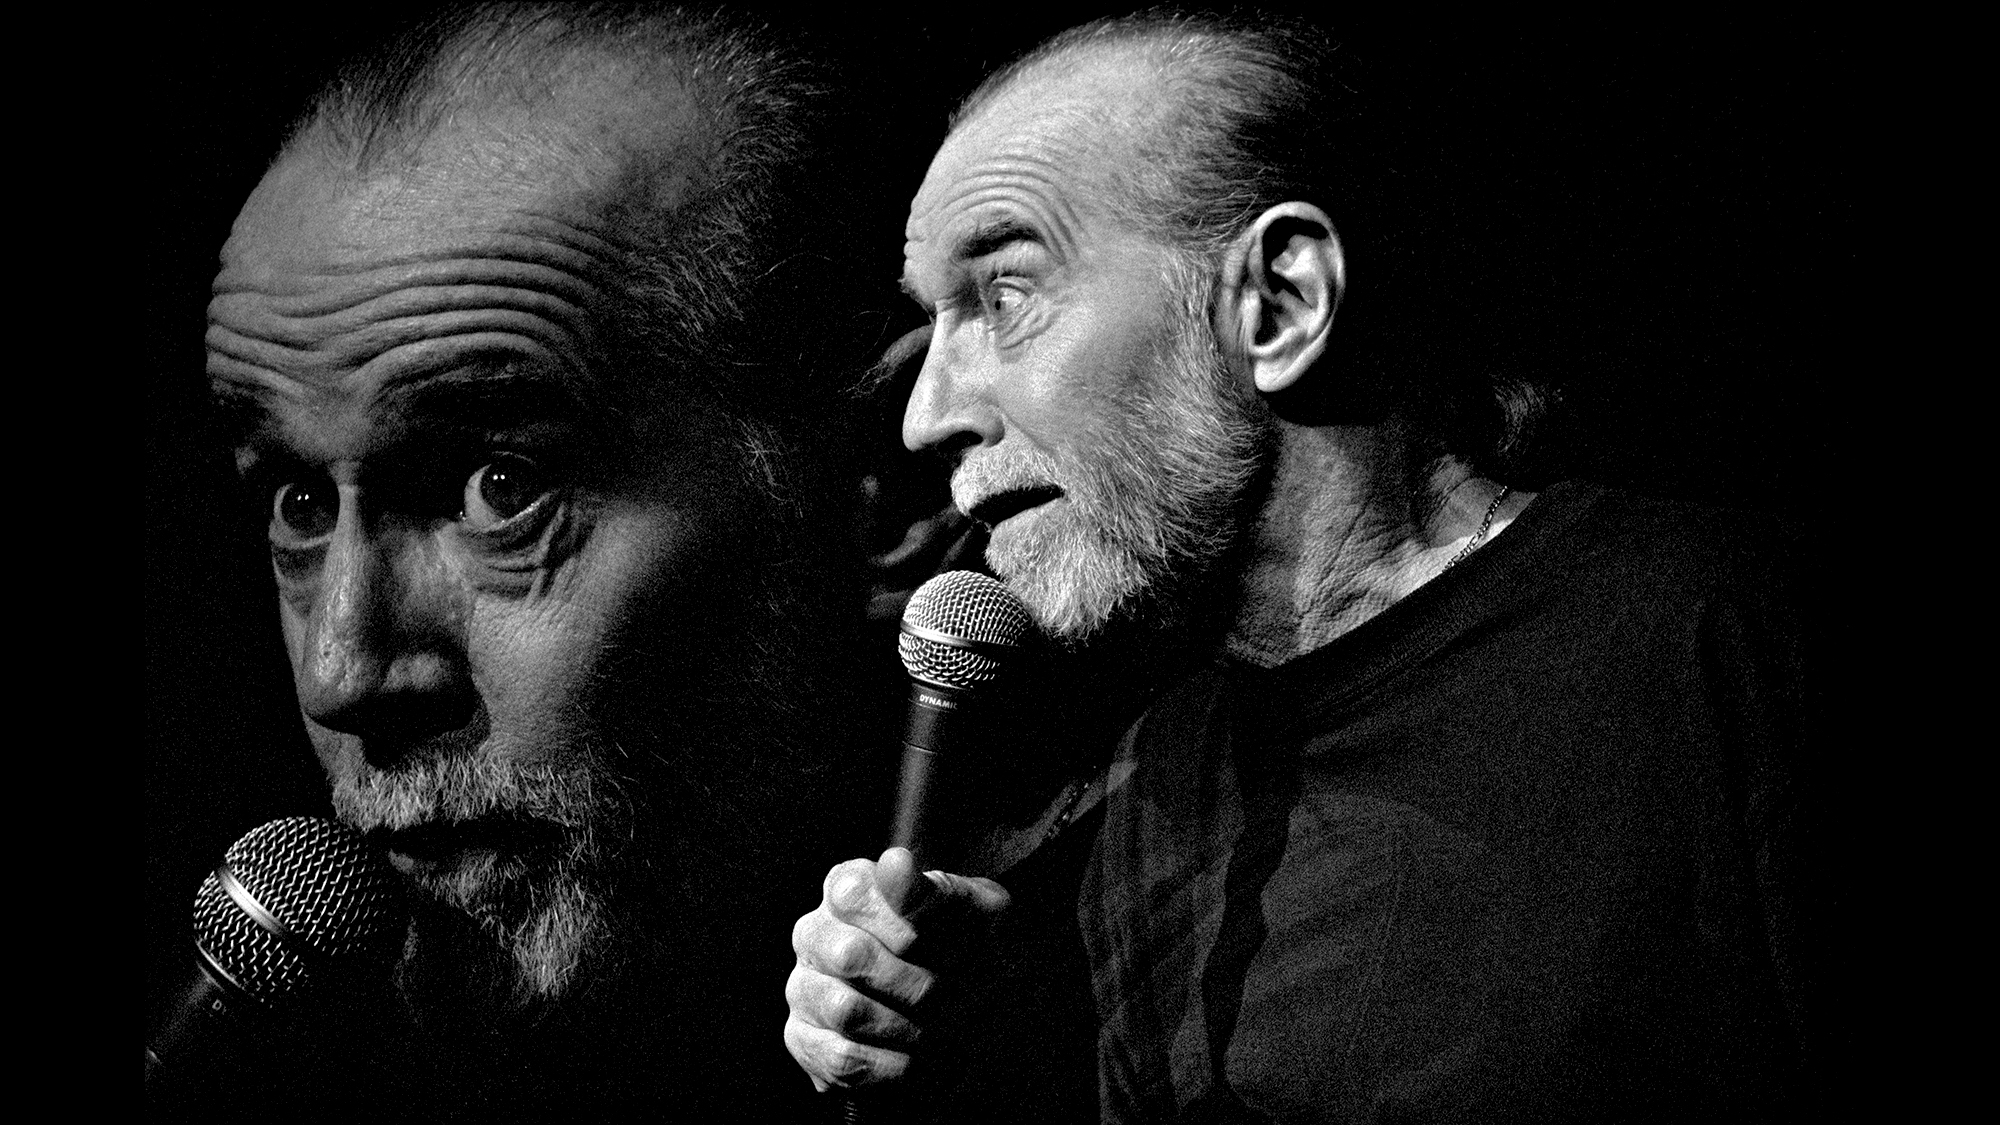 Black and white portrait of George Carlin